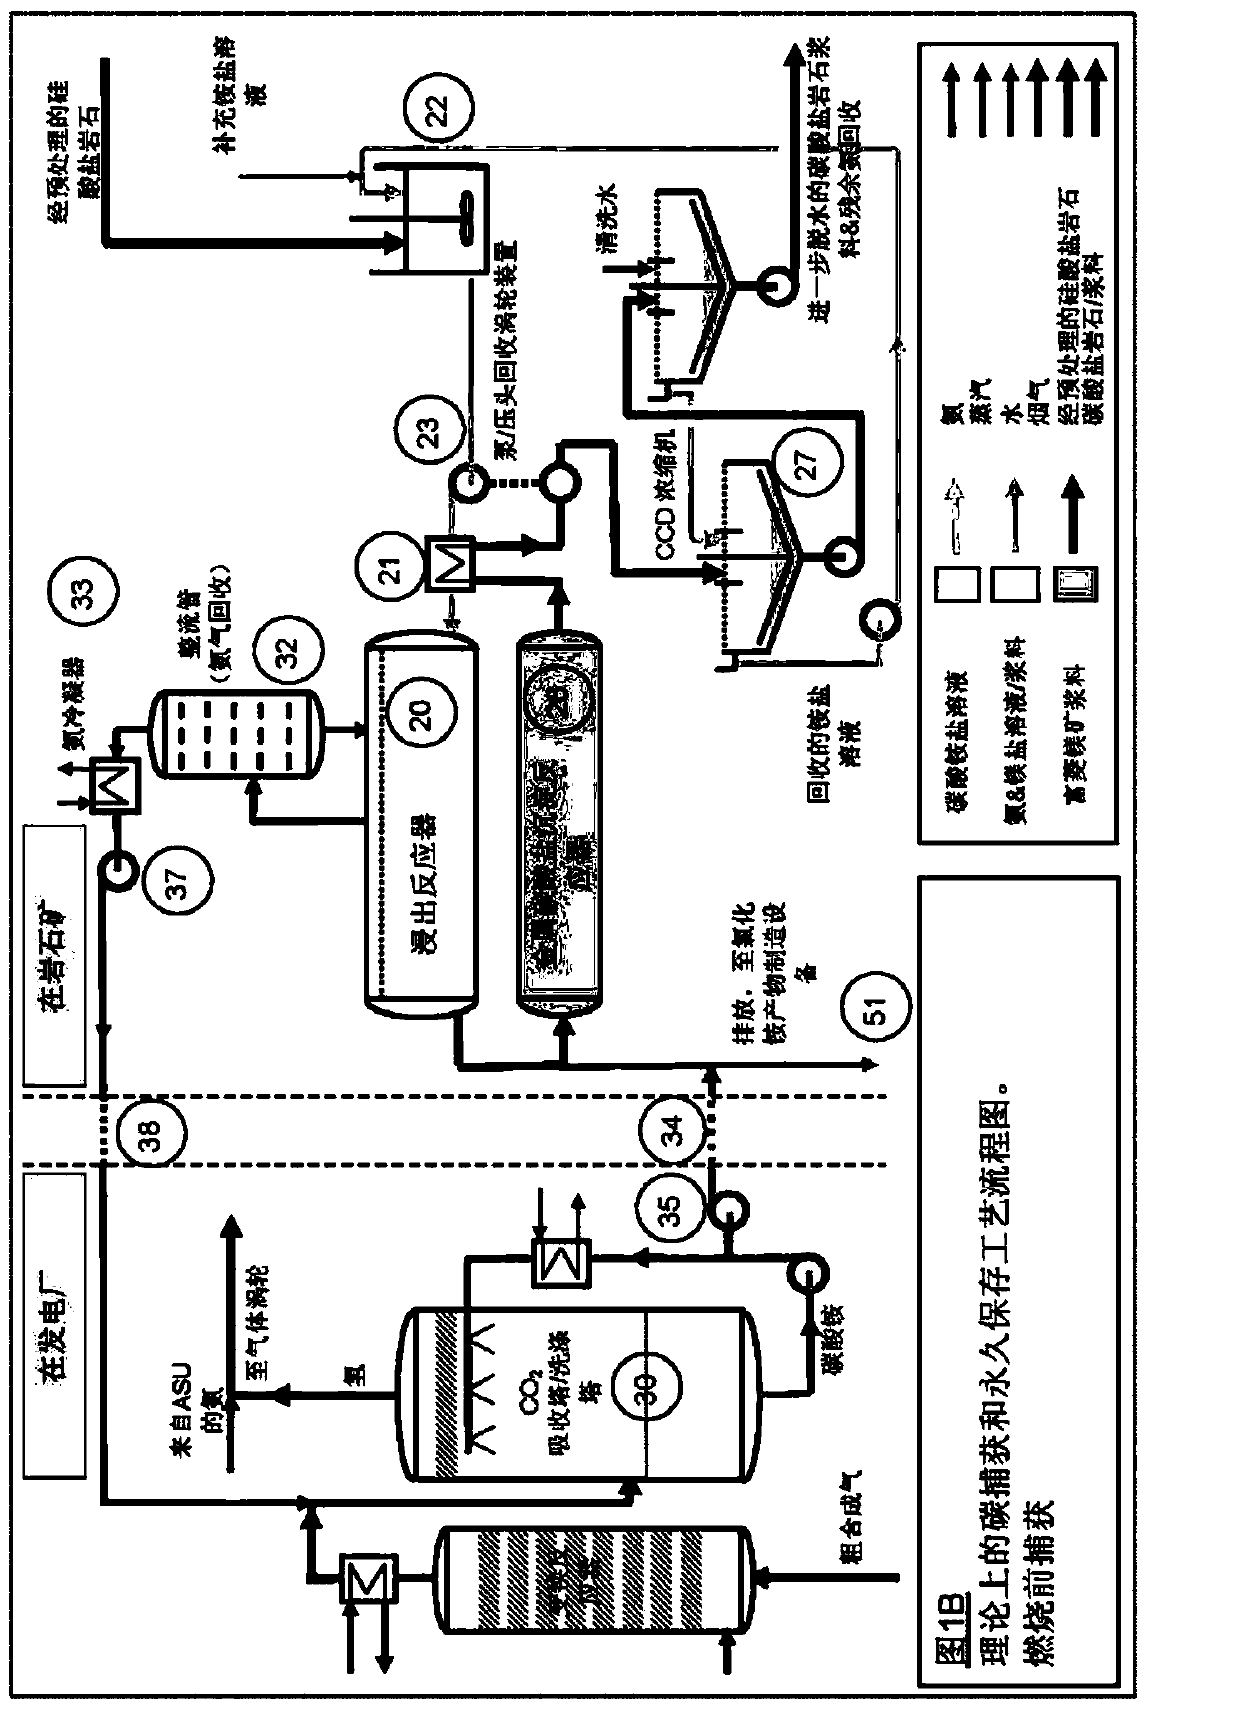 Process and system for capturing carbon dioxide from a gas stream